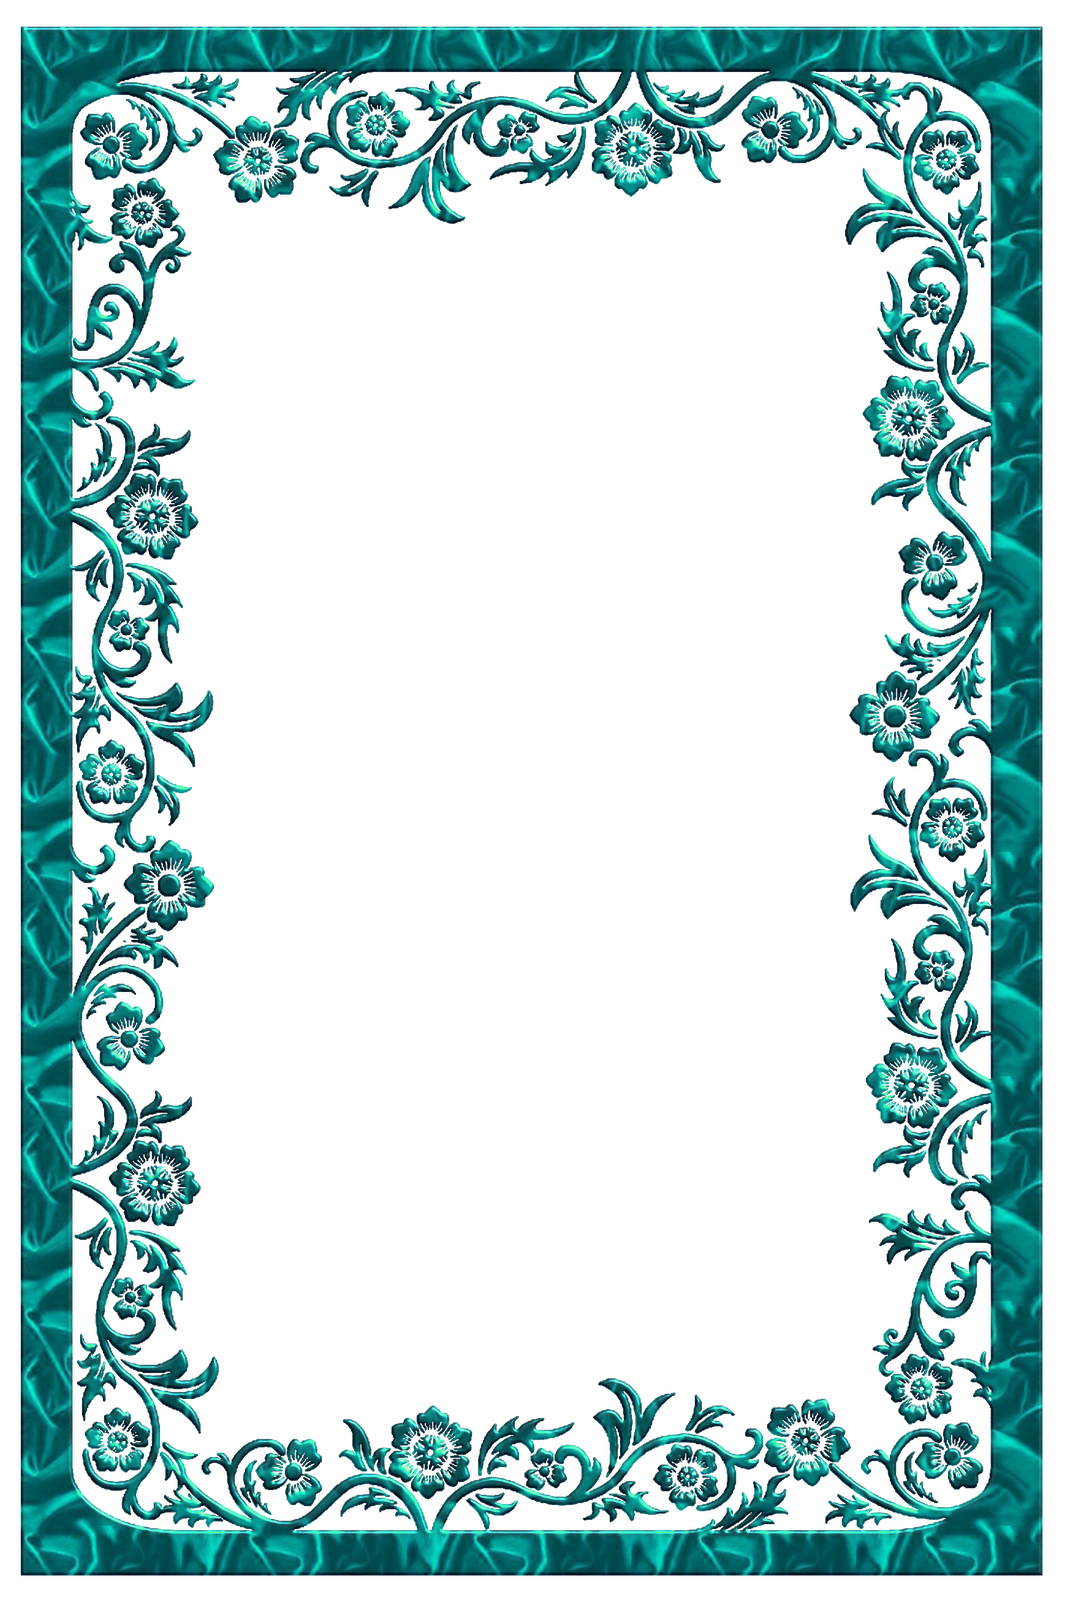 Southern Verges Frame Demarcation Molding PNG